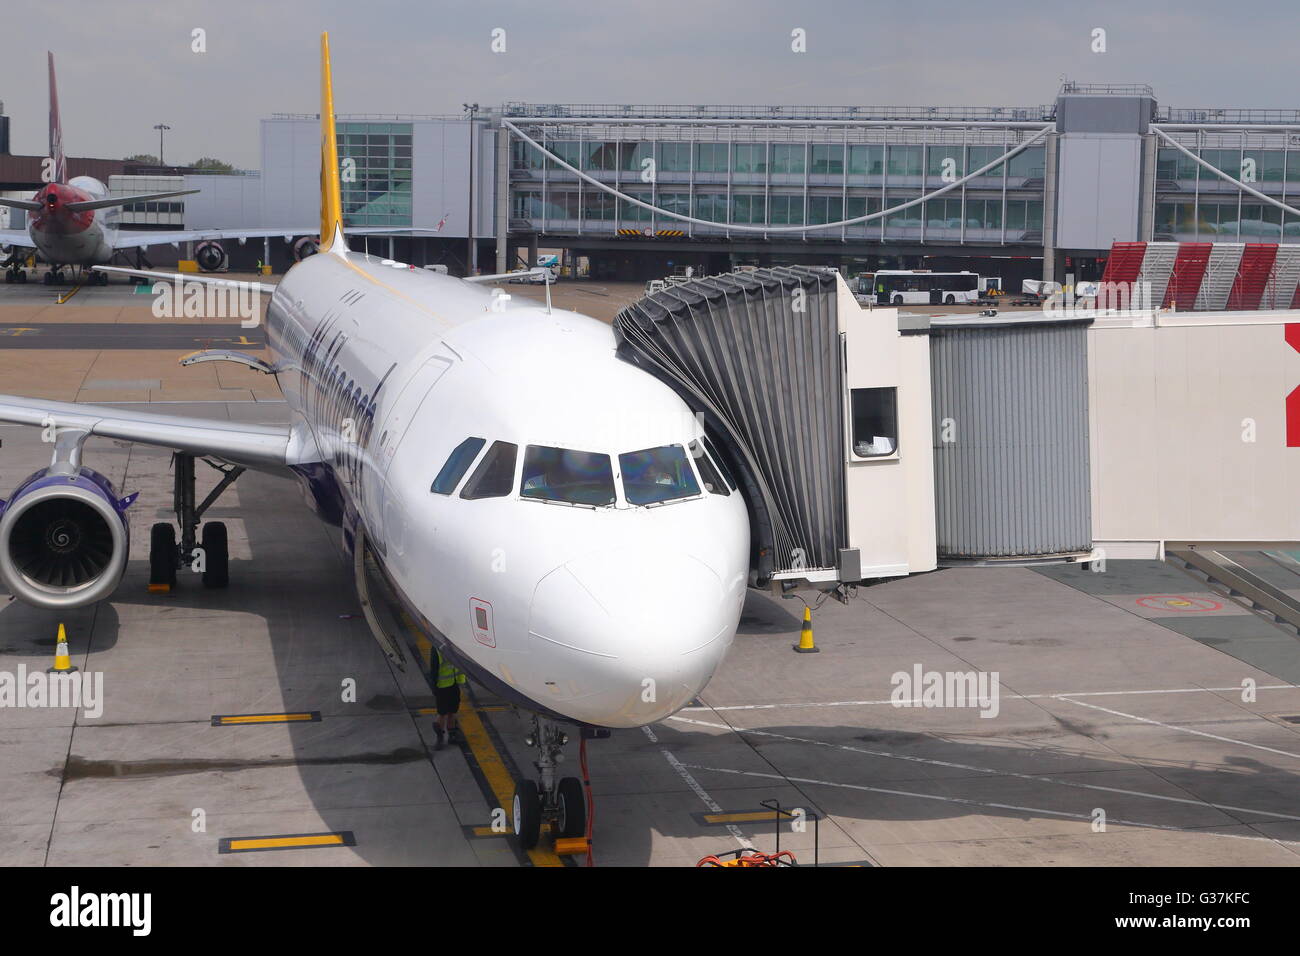 Monarch Airbus A321-231 G-ZBAK at the gate at Funchal Airport, Madeira, Portugal Stock Photo